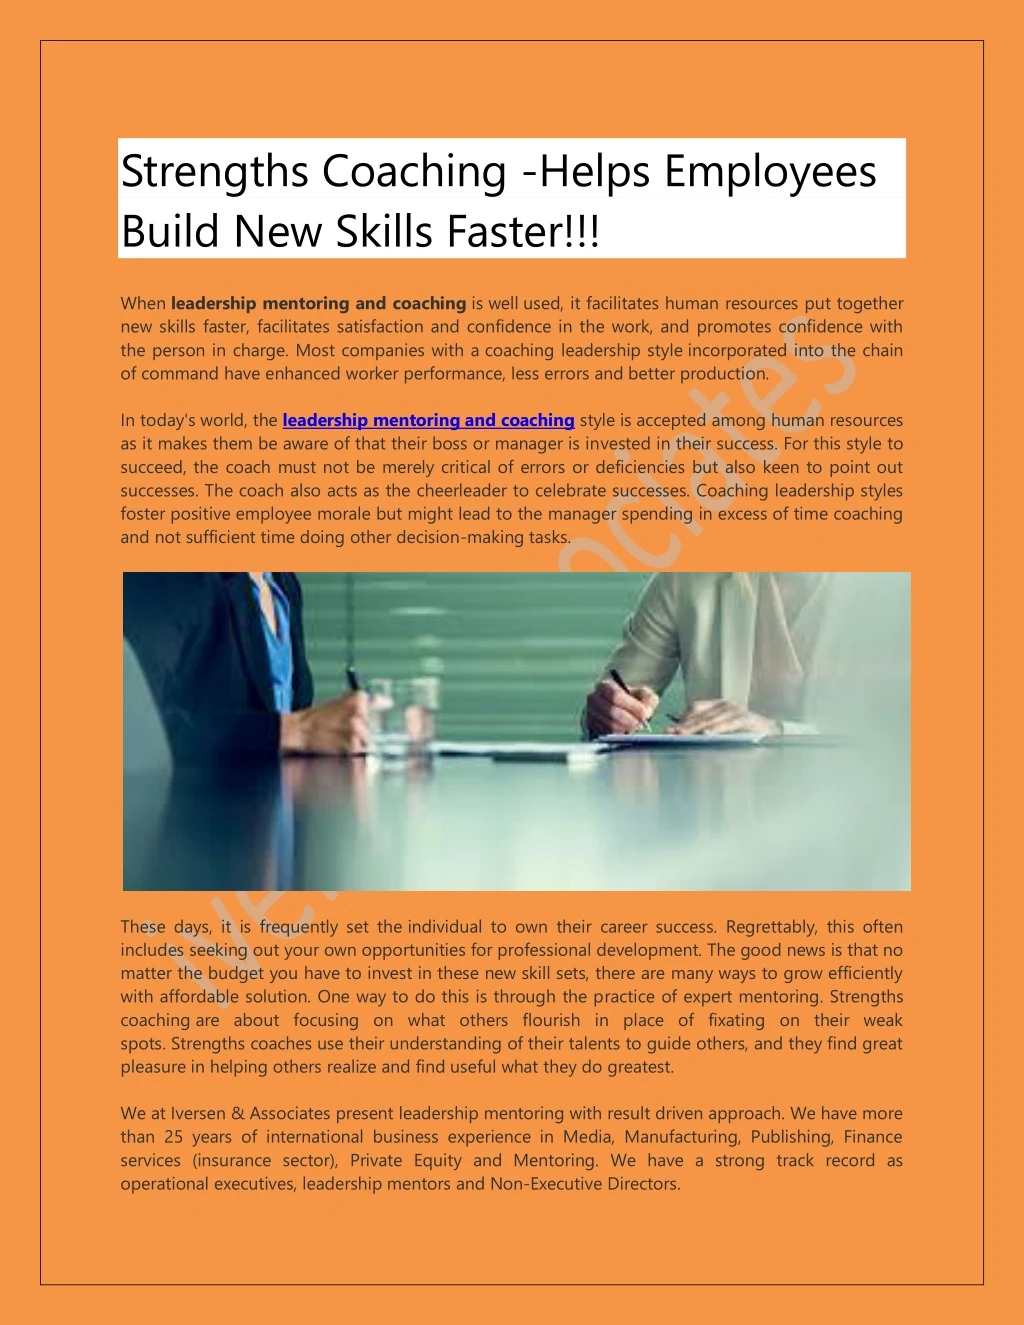 strengths coaching helps employees build